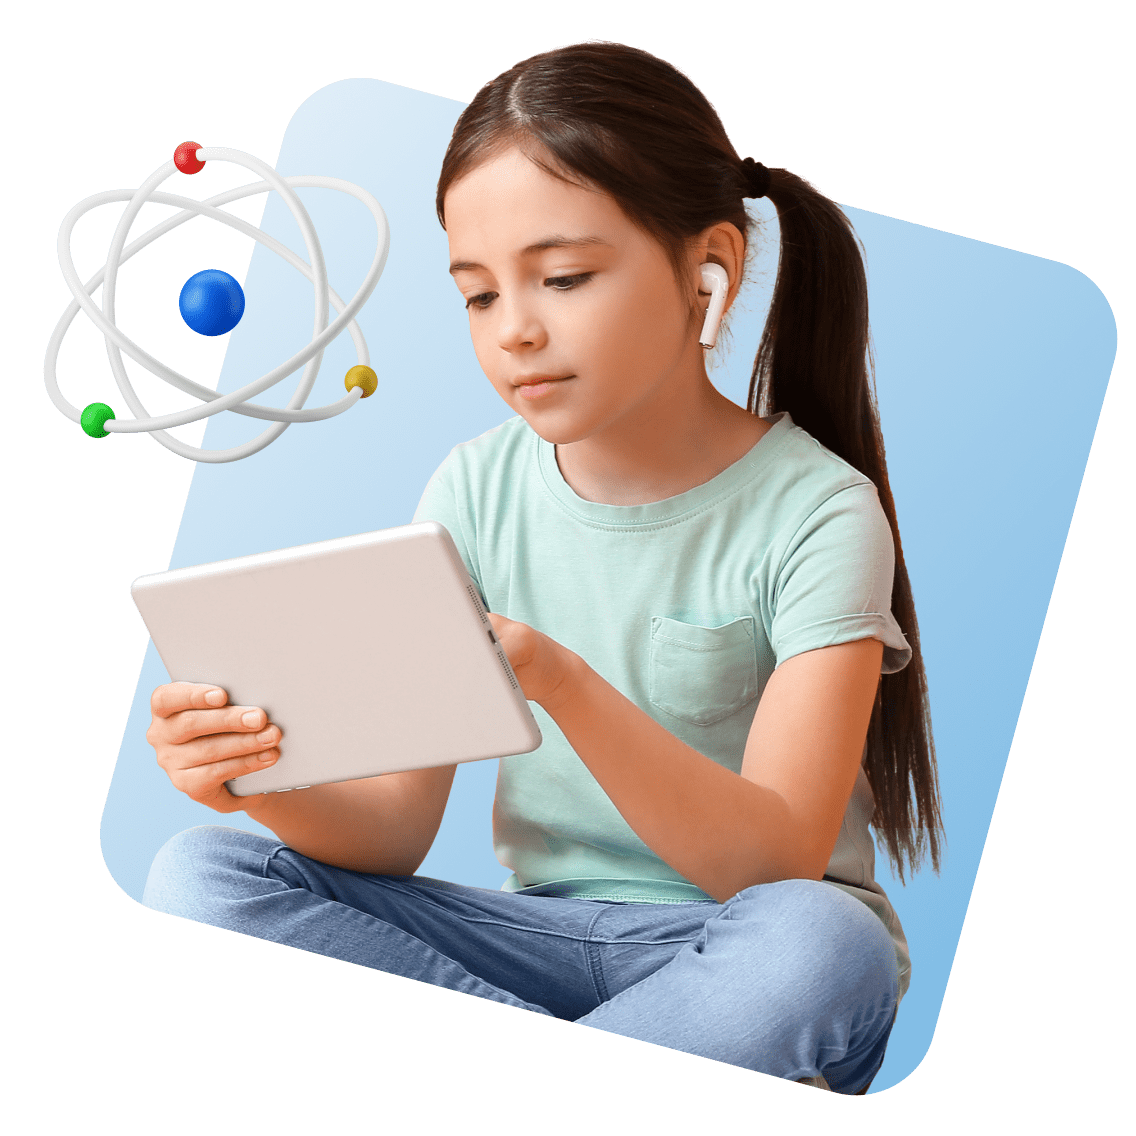 Arizona Online Schools image 6 (name 3 Young Girl Tablet Airpods Science)